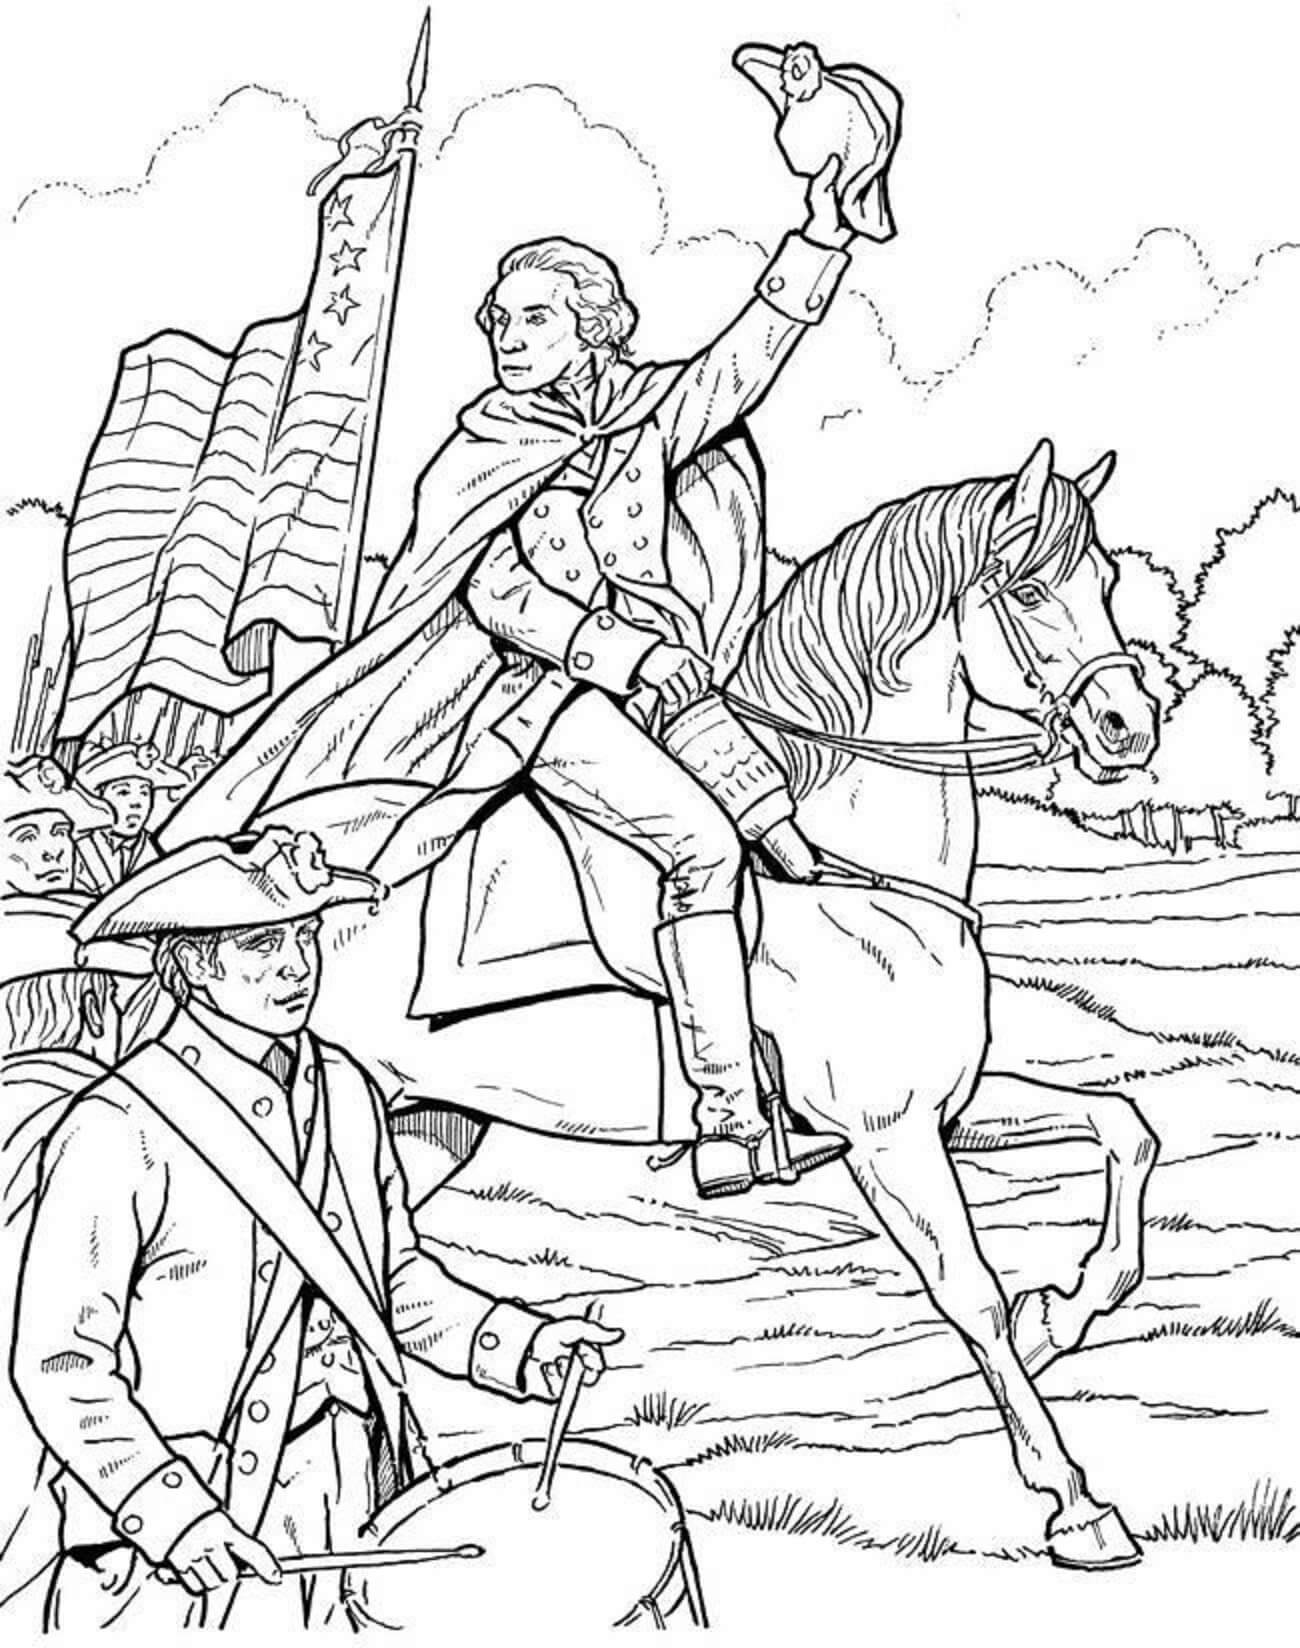 George Washington Face coloring page - Download, Print or Color Online ...